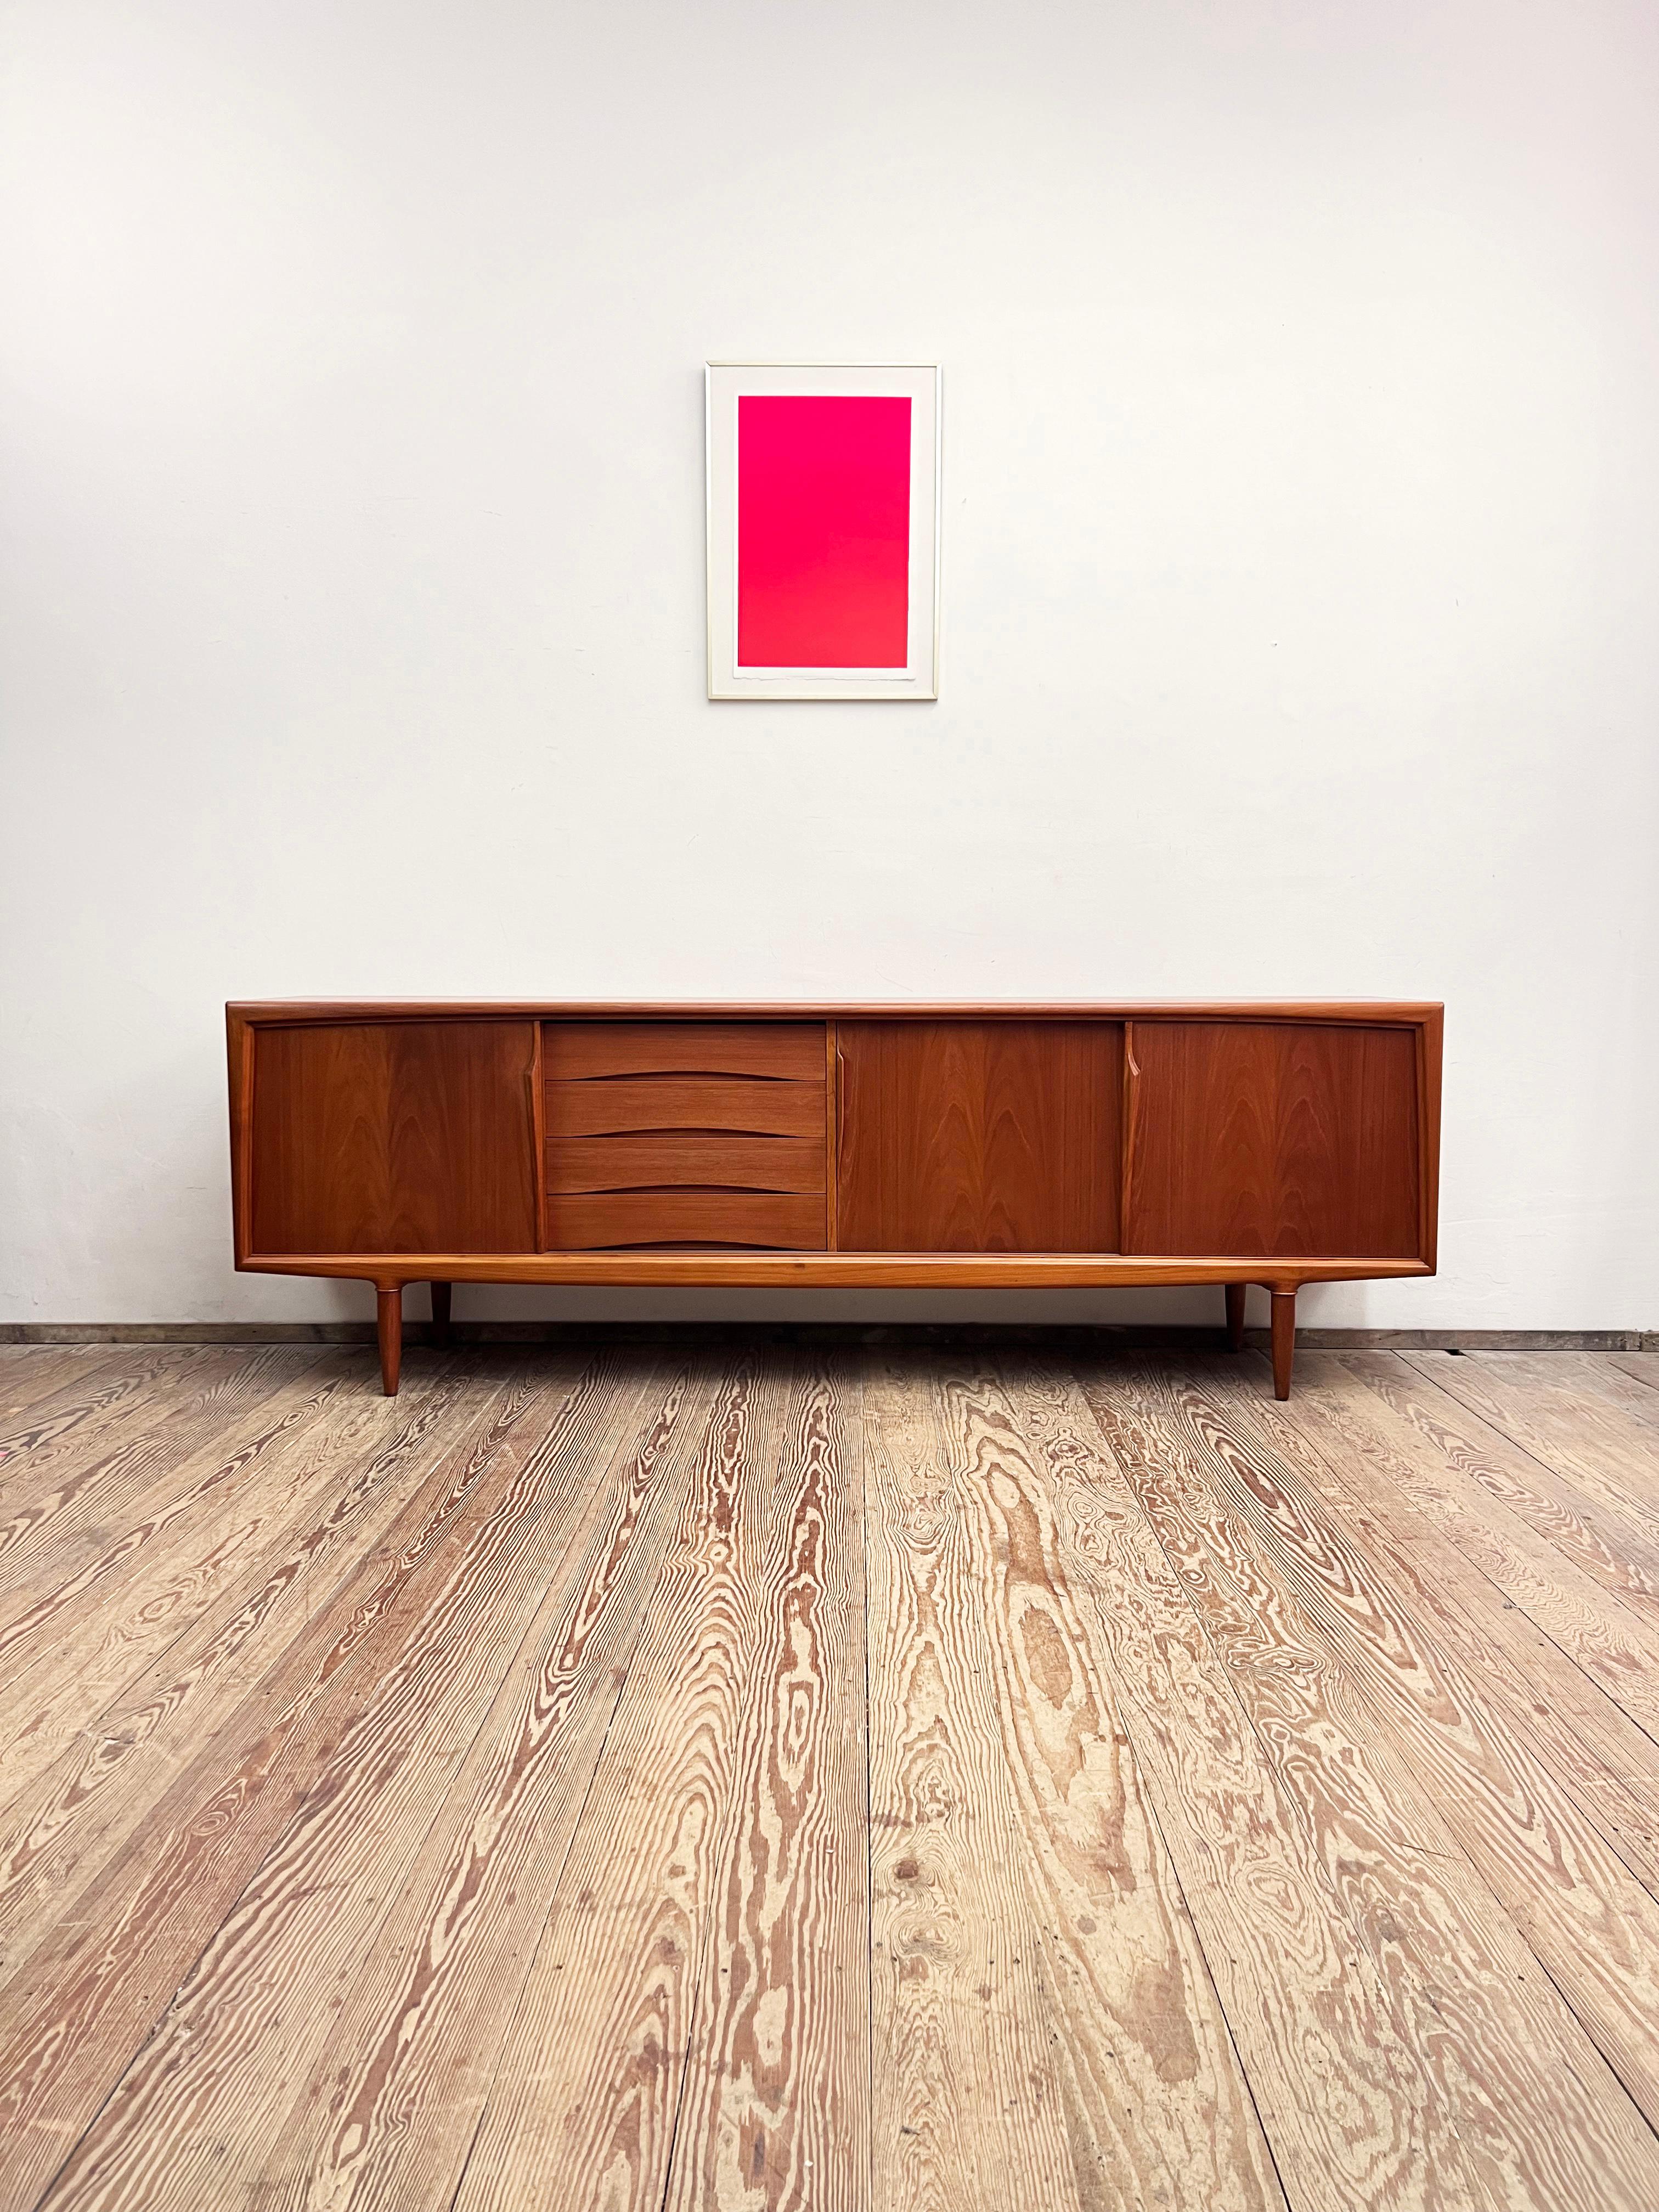 Dimensions: 240x50x80 cm (Width x Depth x Height)

This Scandinavian design sideboard or TV console was manufactured in the 1950s by Axel Christensen Odder or ACO in Denmark.

The mid-century Credenza showcases exquisite Danish design and